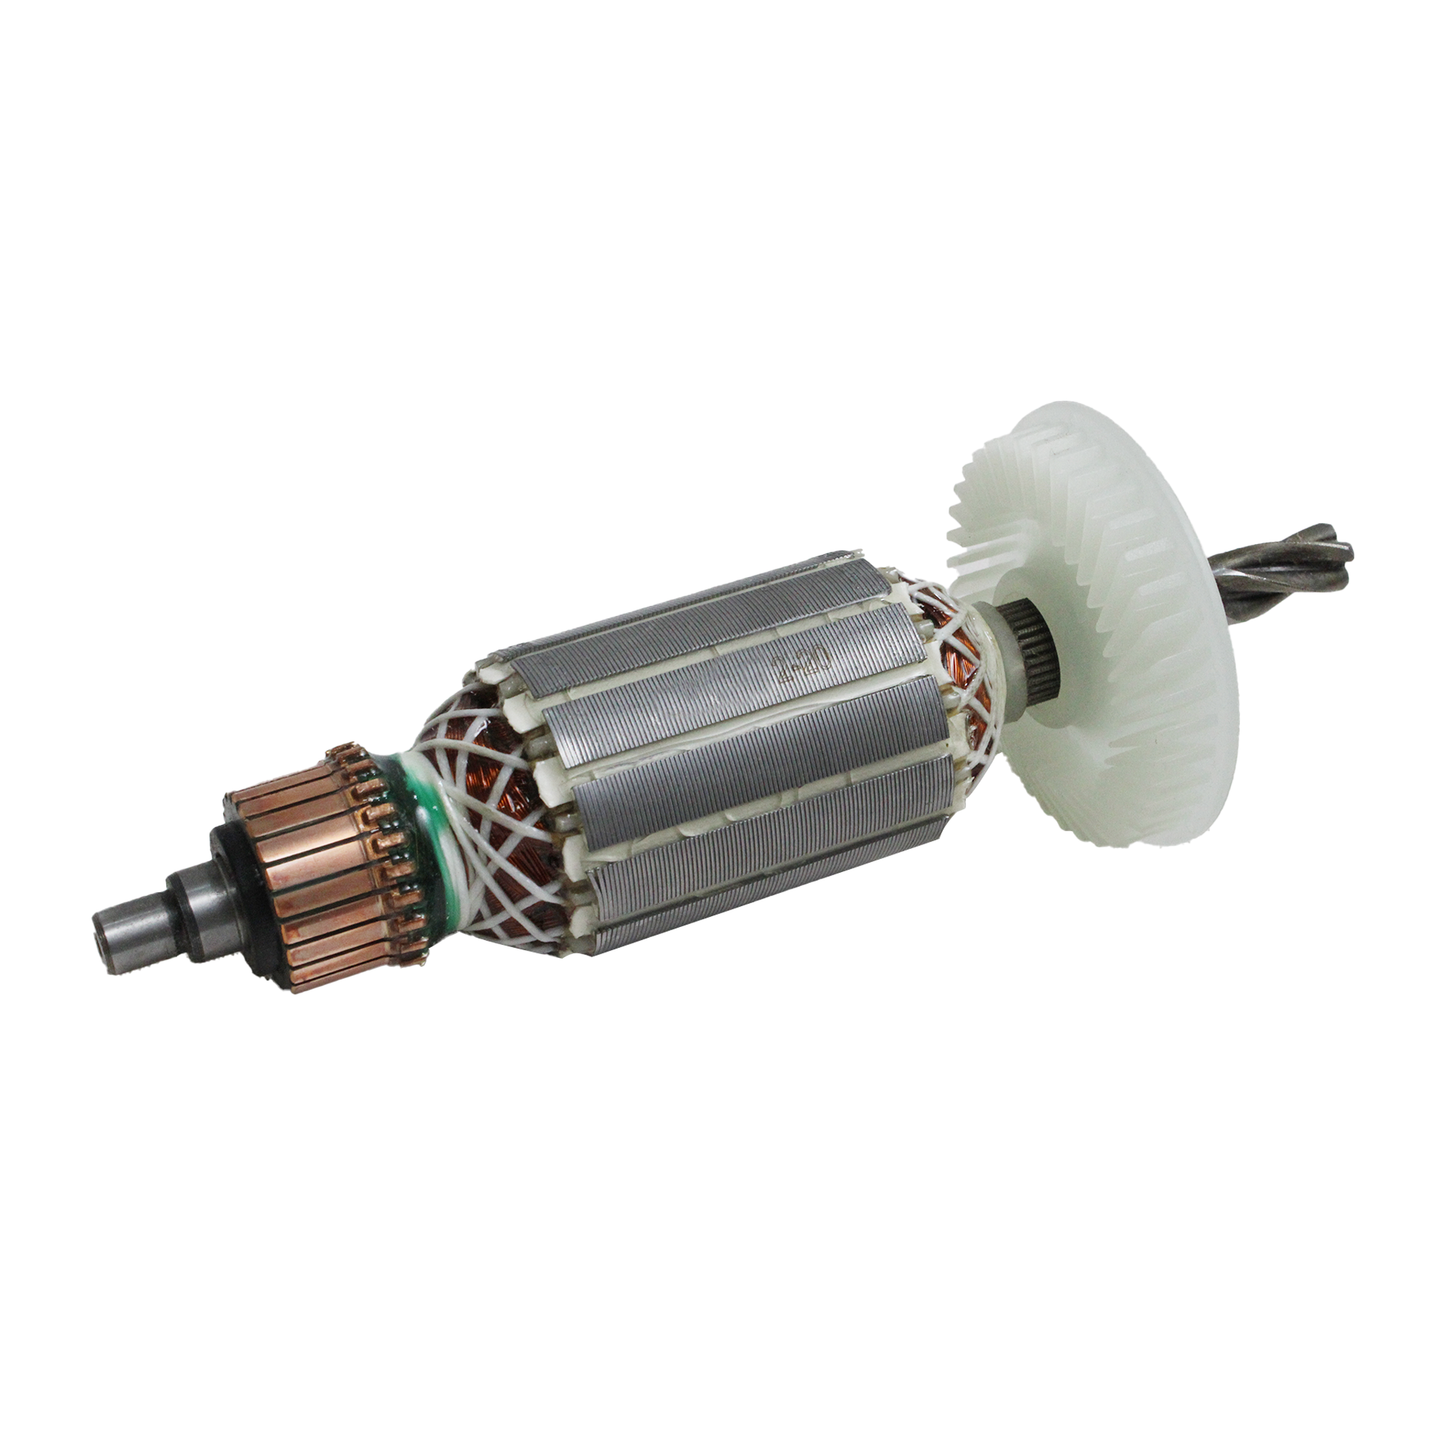 AEGON ACWF2-20 Copper Armature - Compatible with Aegon AHD201, Bosch GBH 2-20 & More